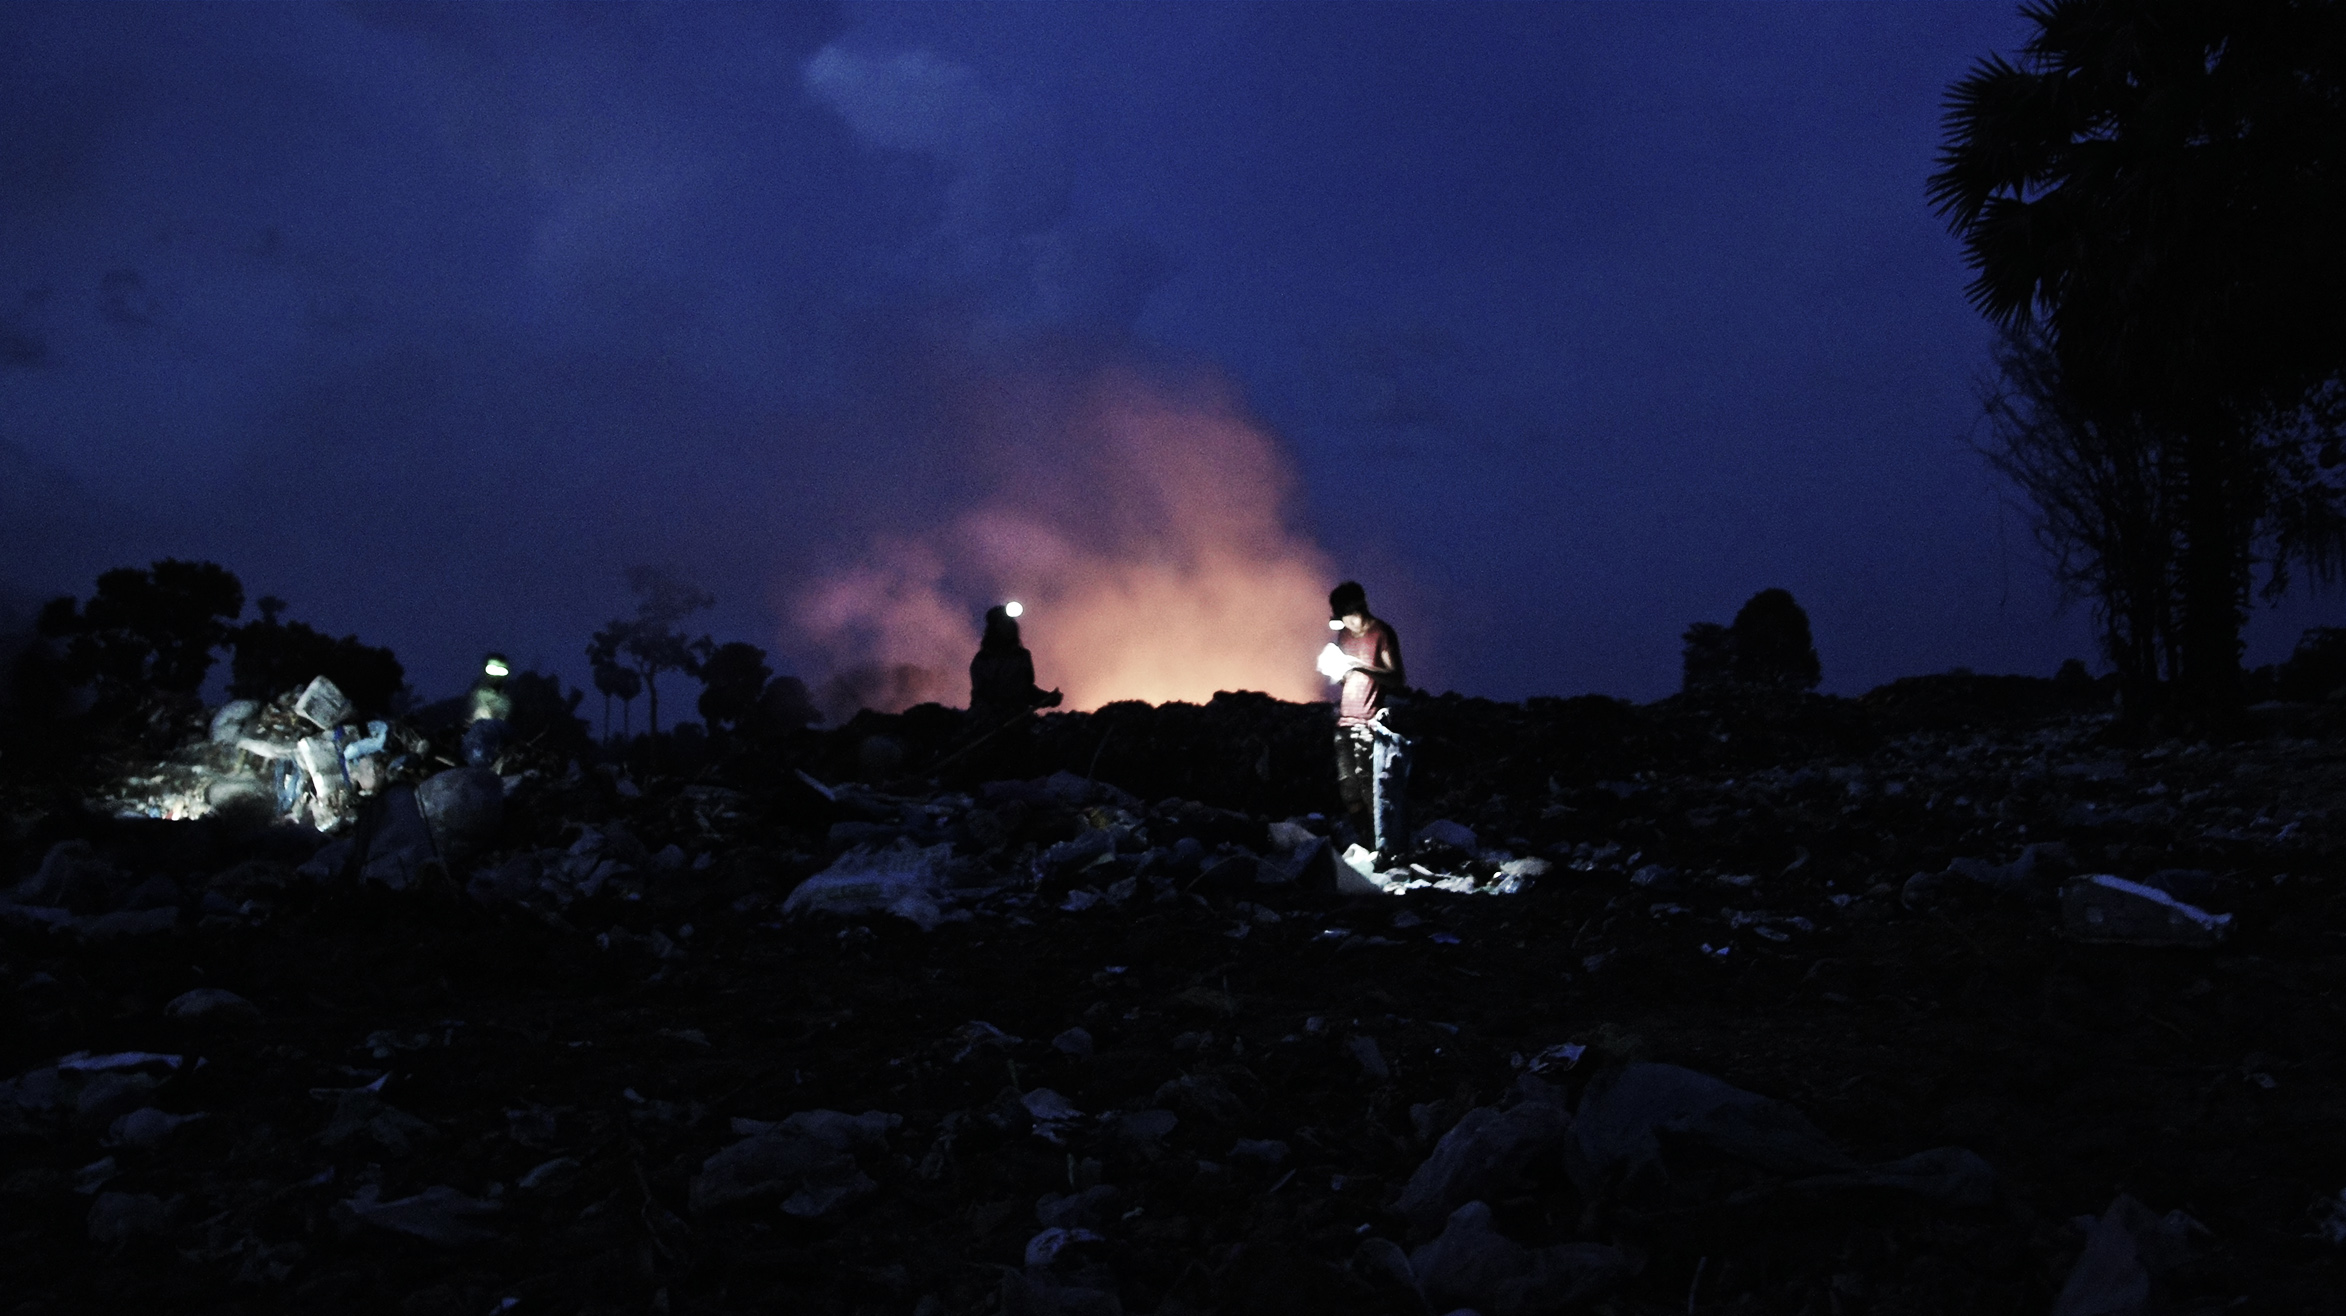 As darkness falls, work still continues late into the night; Sobat, a 17-year-old high school student by day straps on his head torch and searches for recyclable items. He comes to the dump at night to try to make enough money to send himself to college.